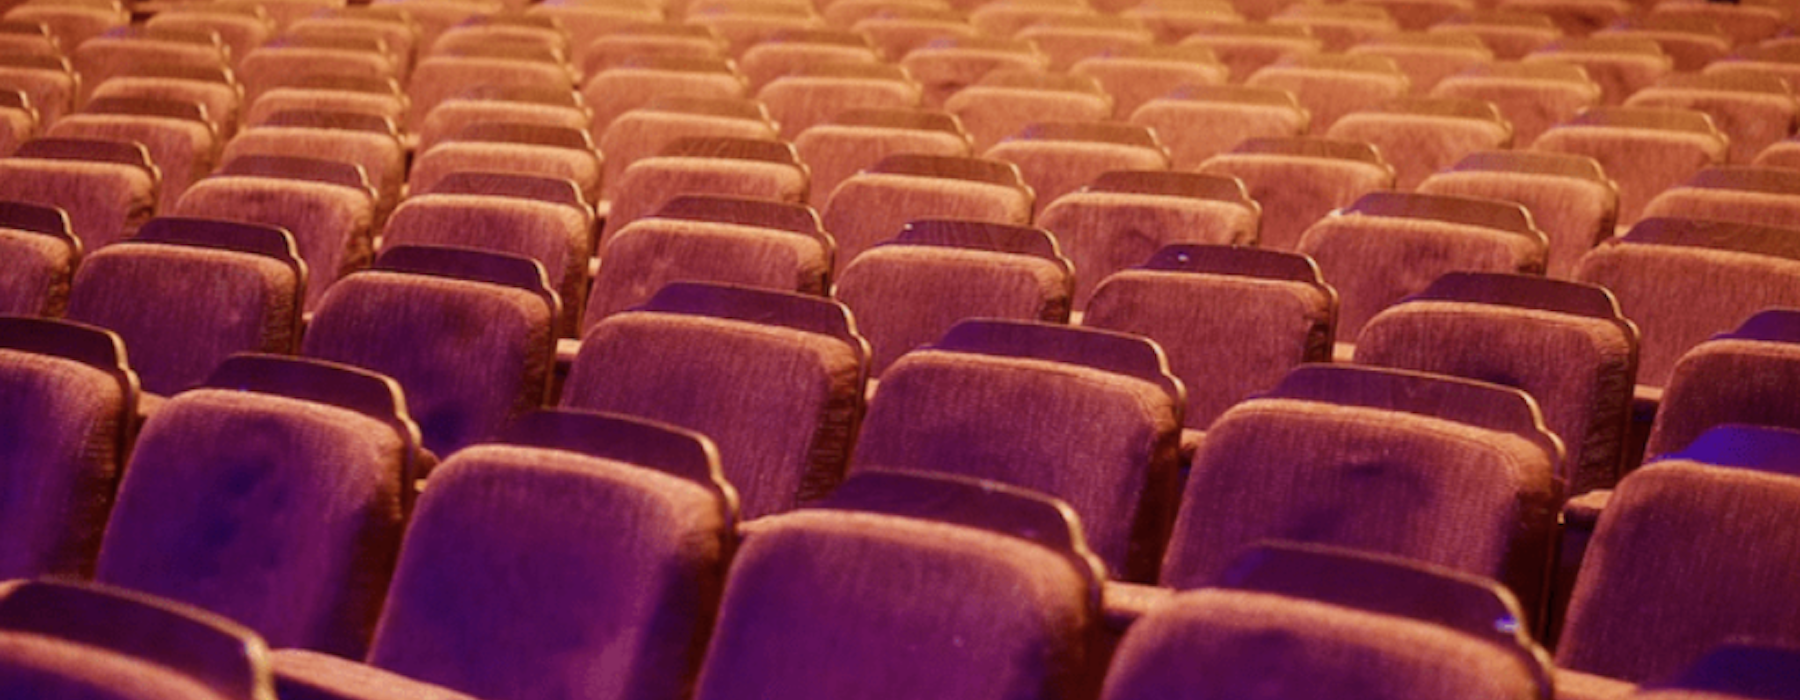 close-up of theatre seating